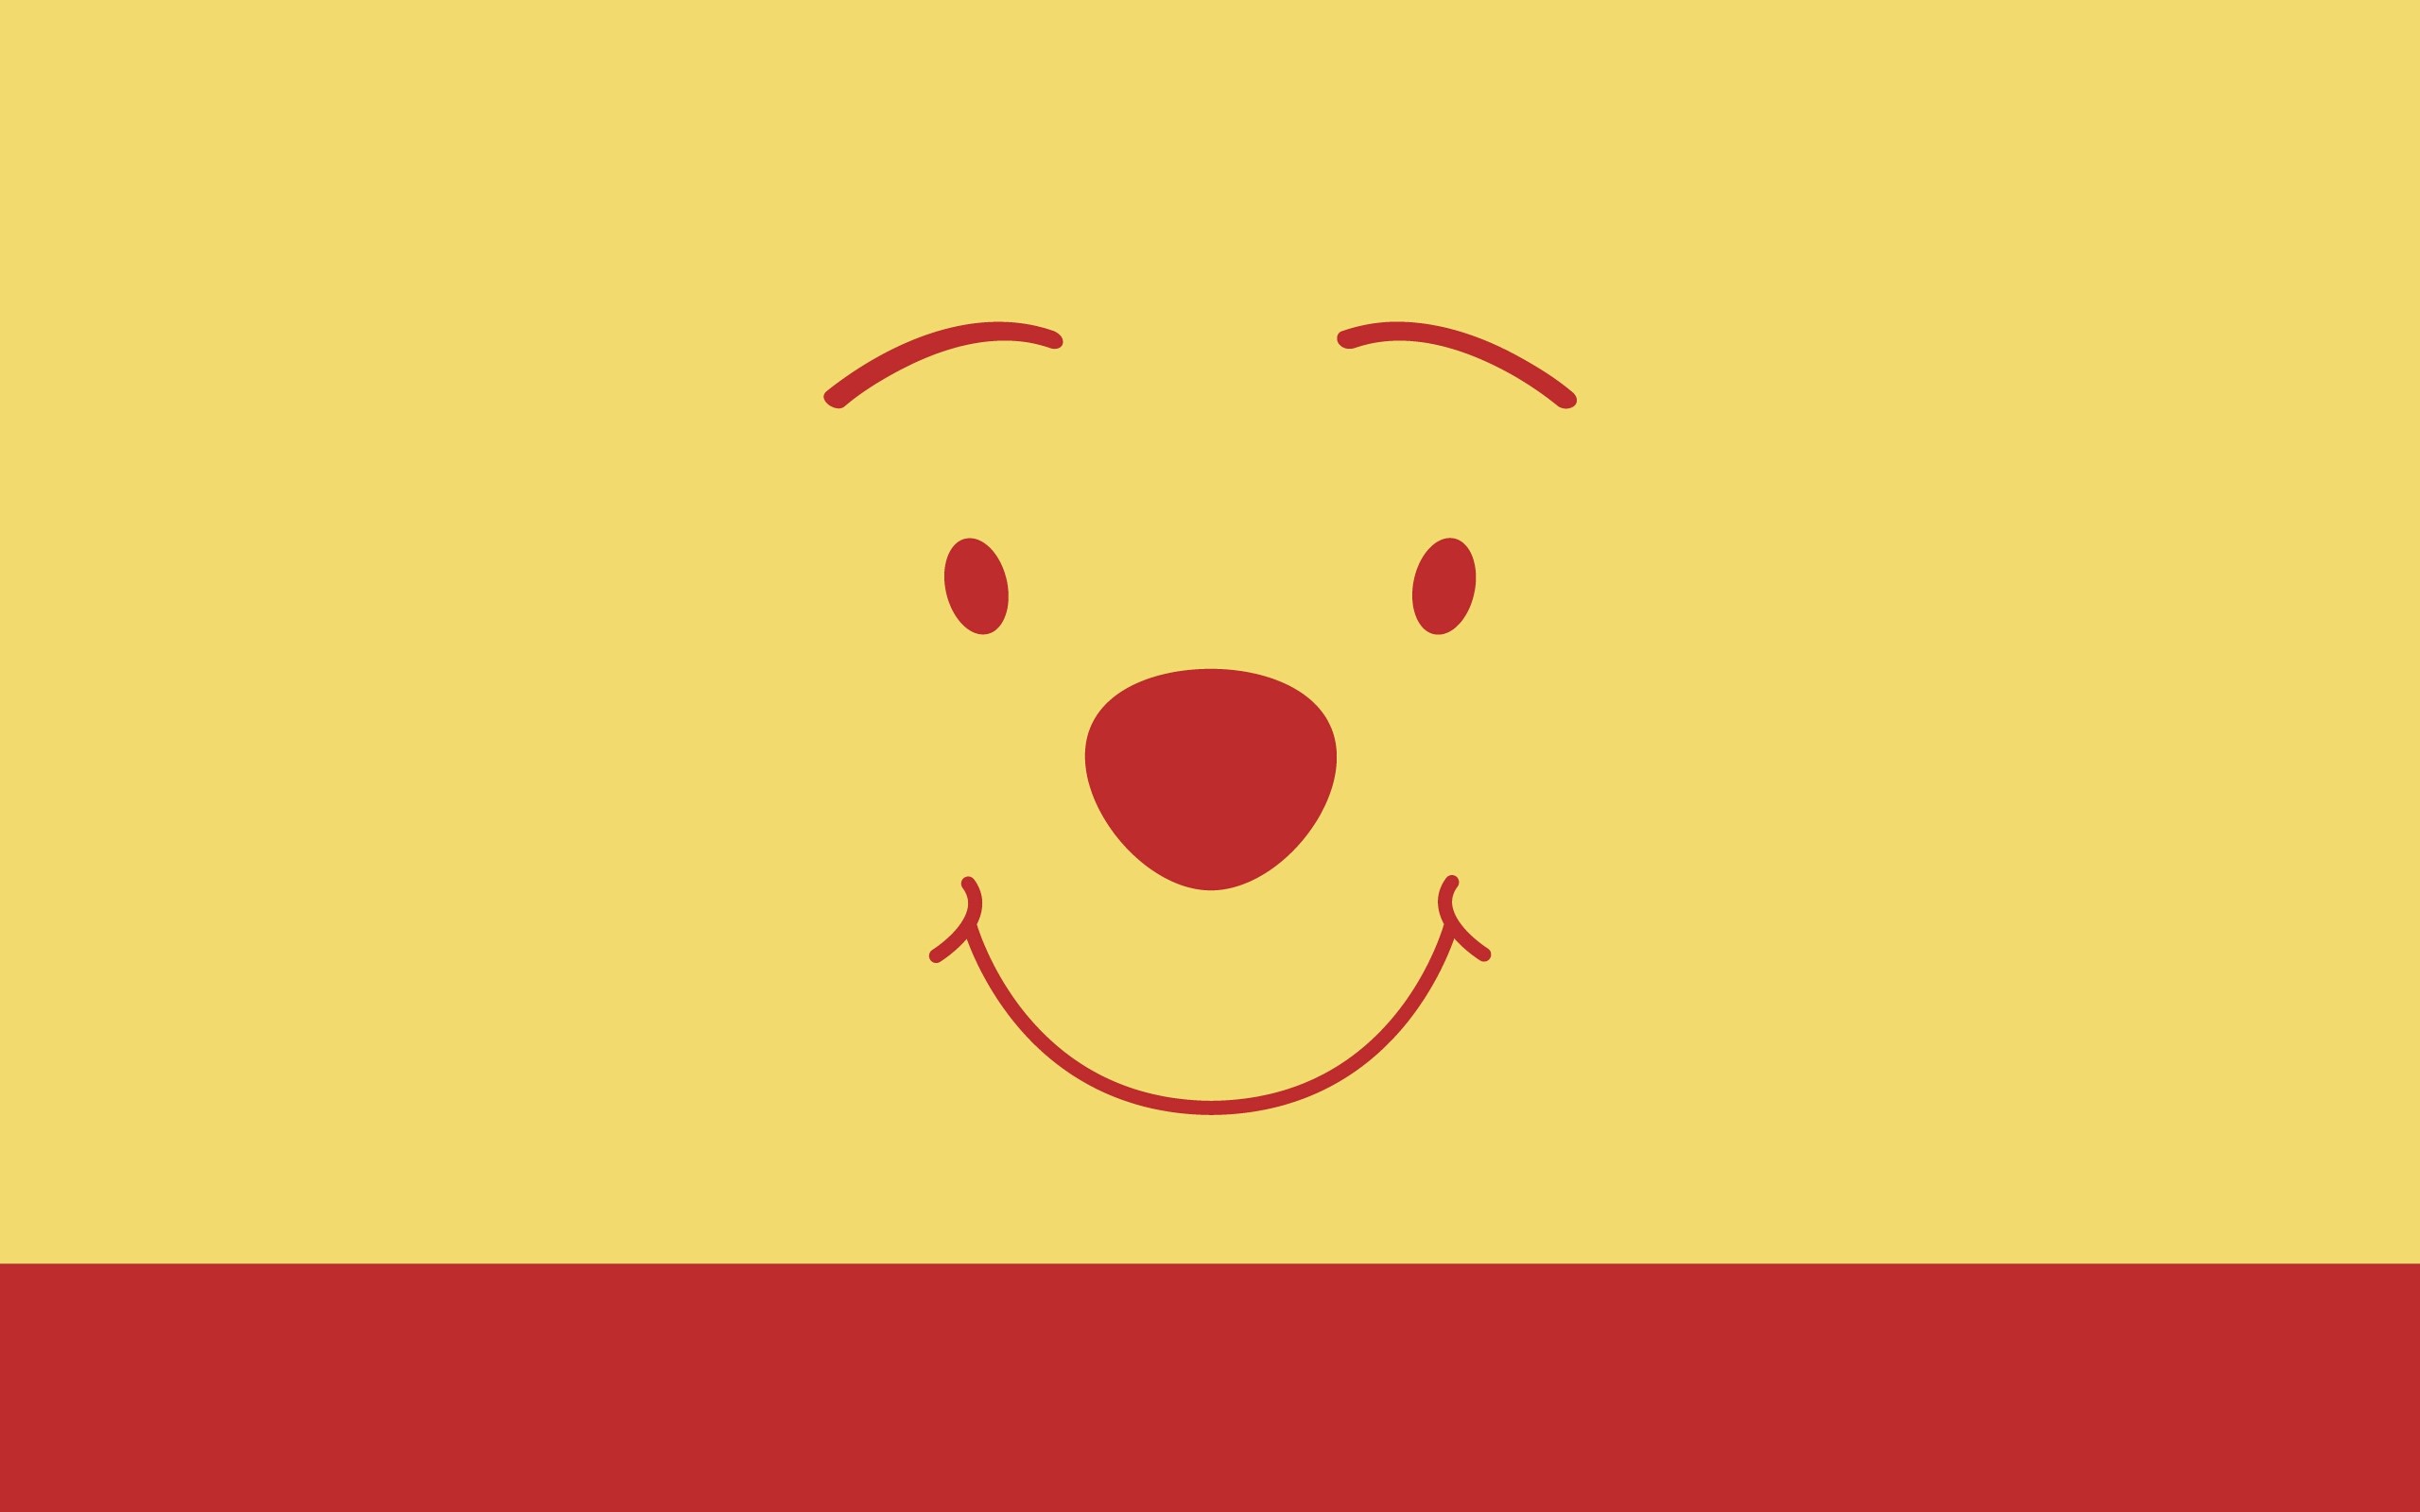 General 2560x1600 Winnie the Pooh minimalism simple background yellow background artwork face